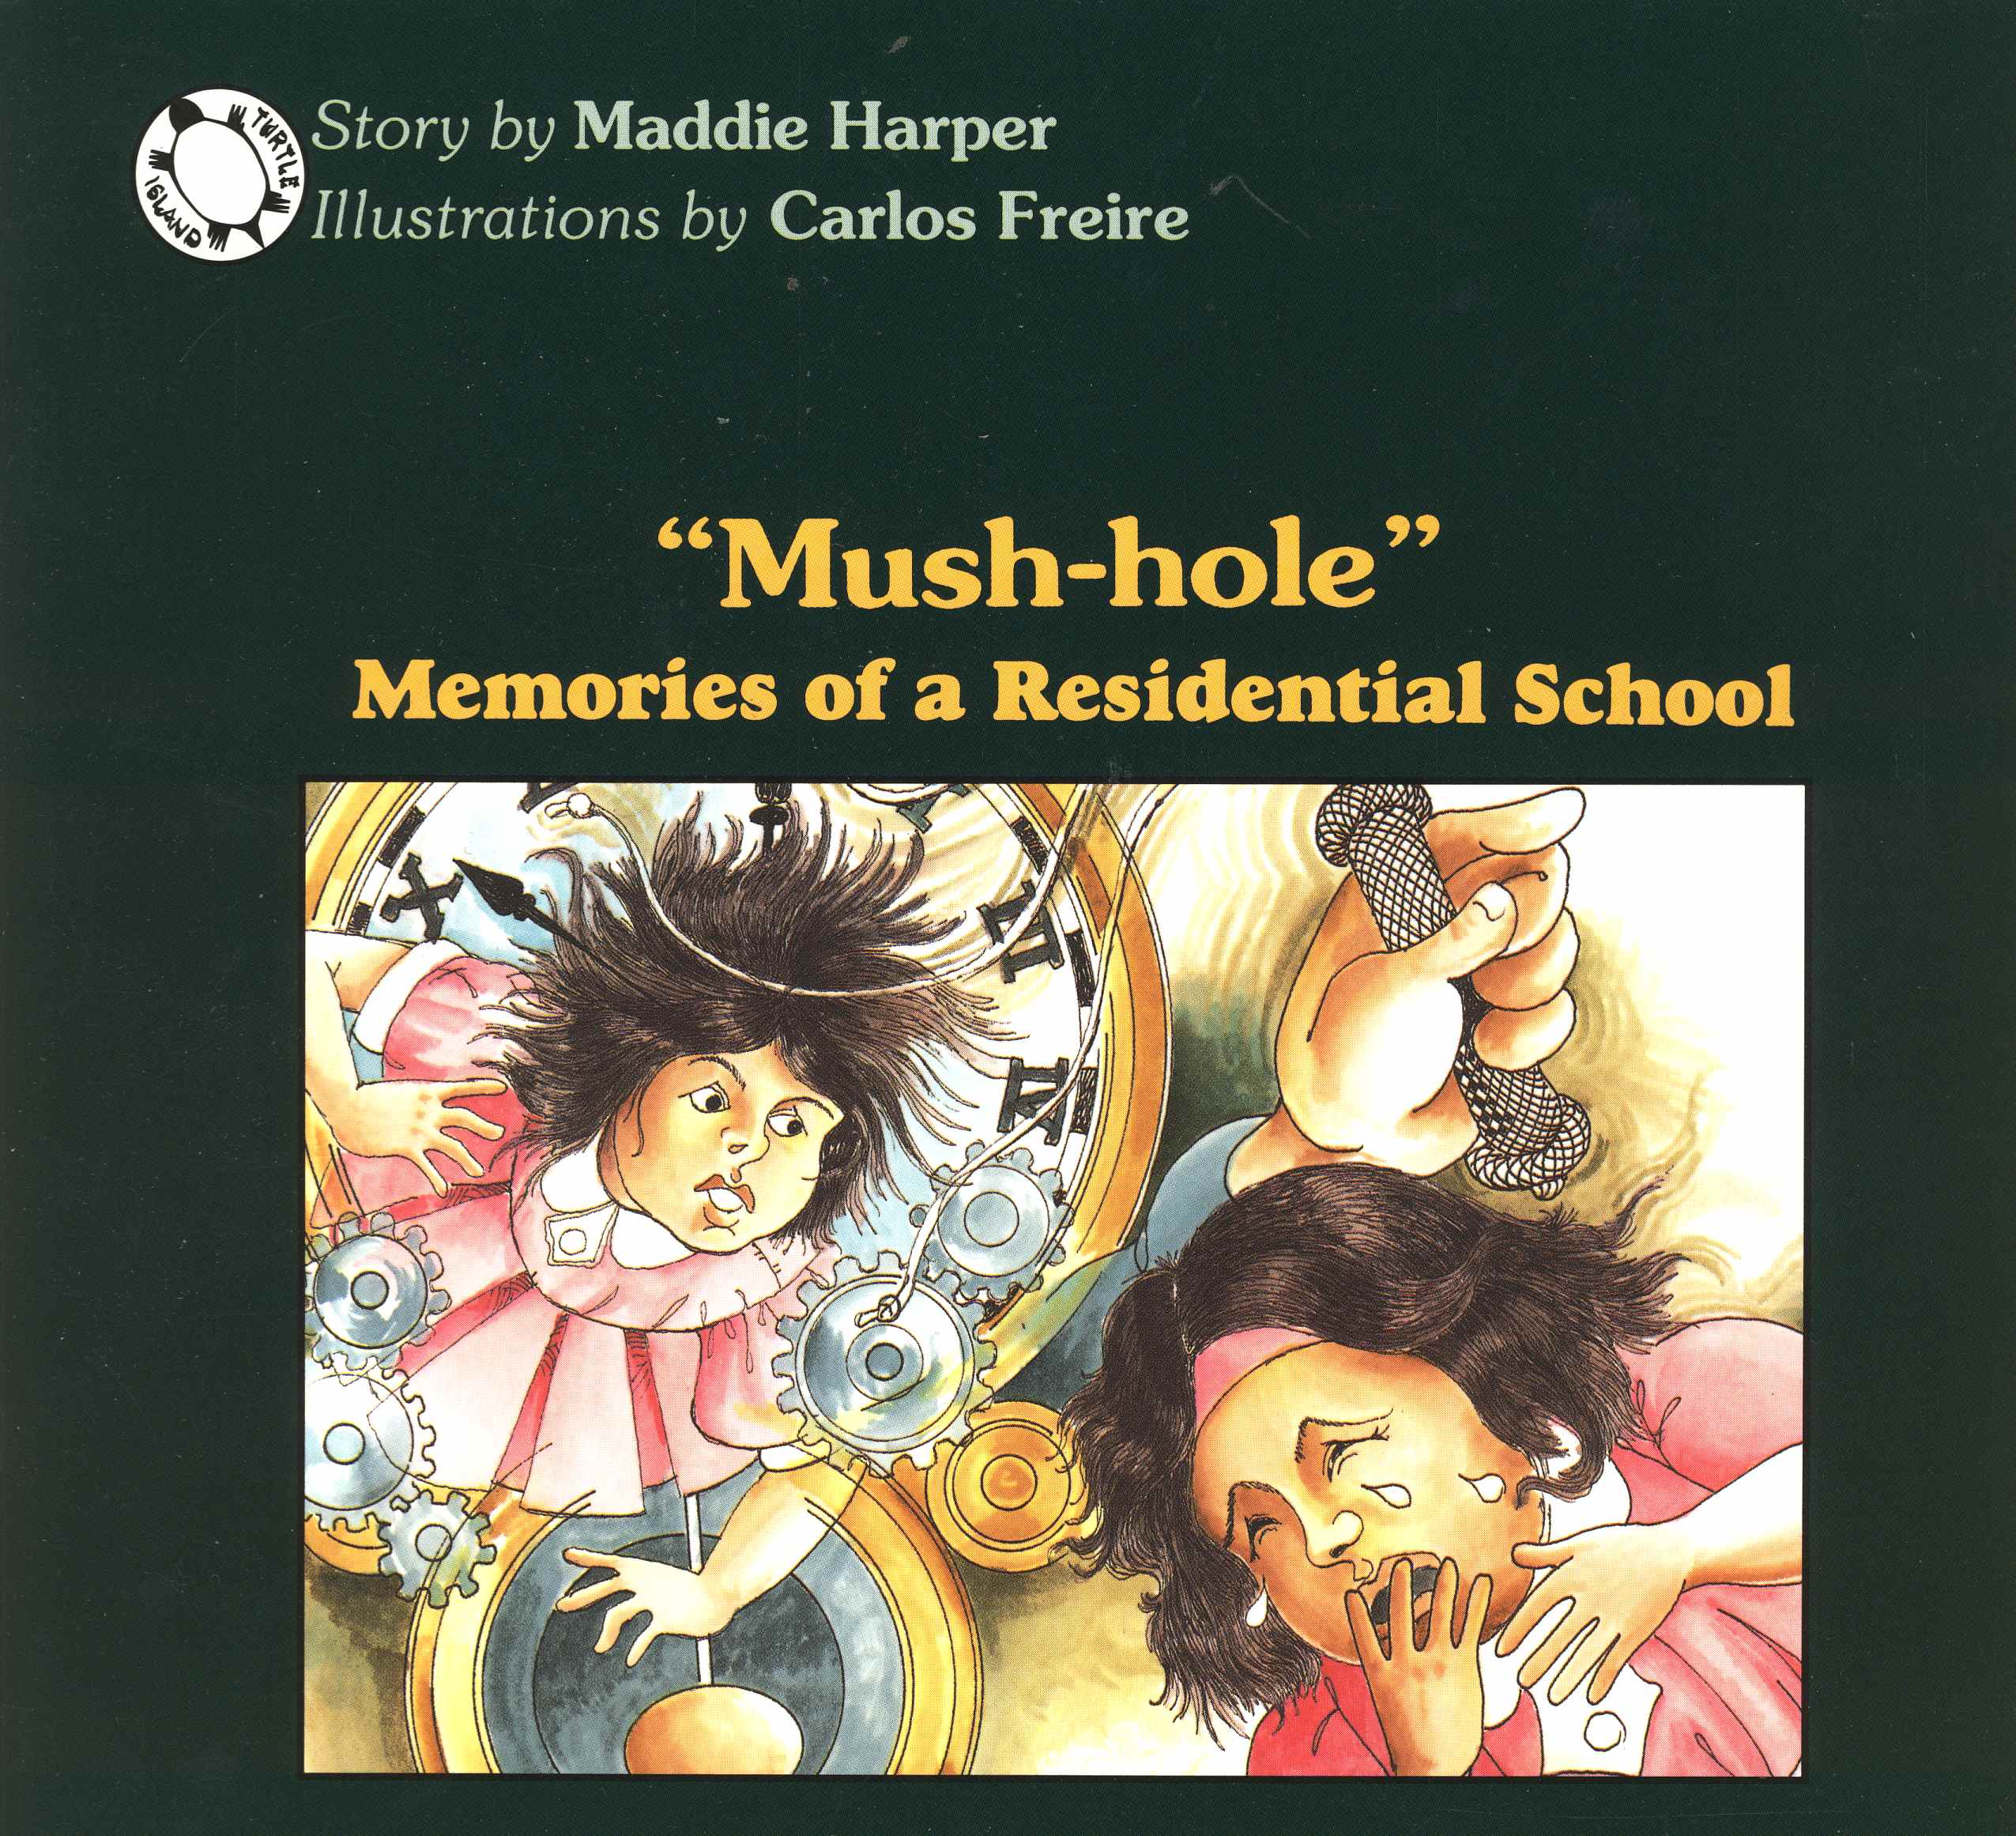 of　School　Mush-Hole　Residential　Memories　a